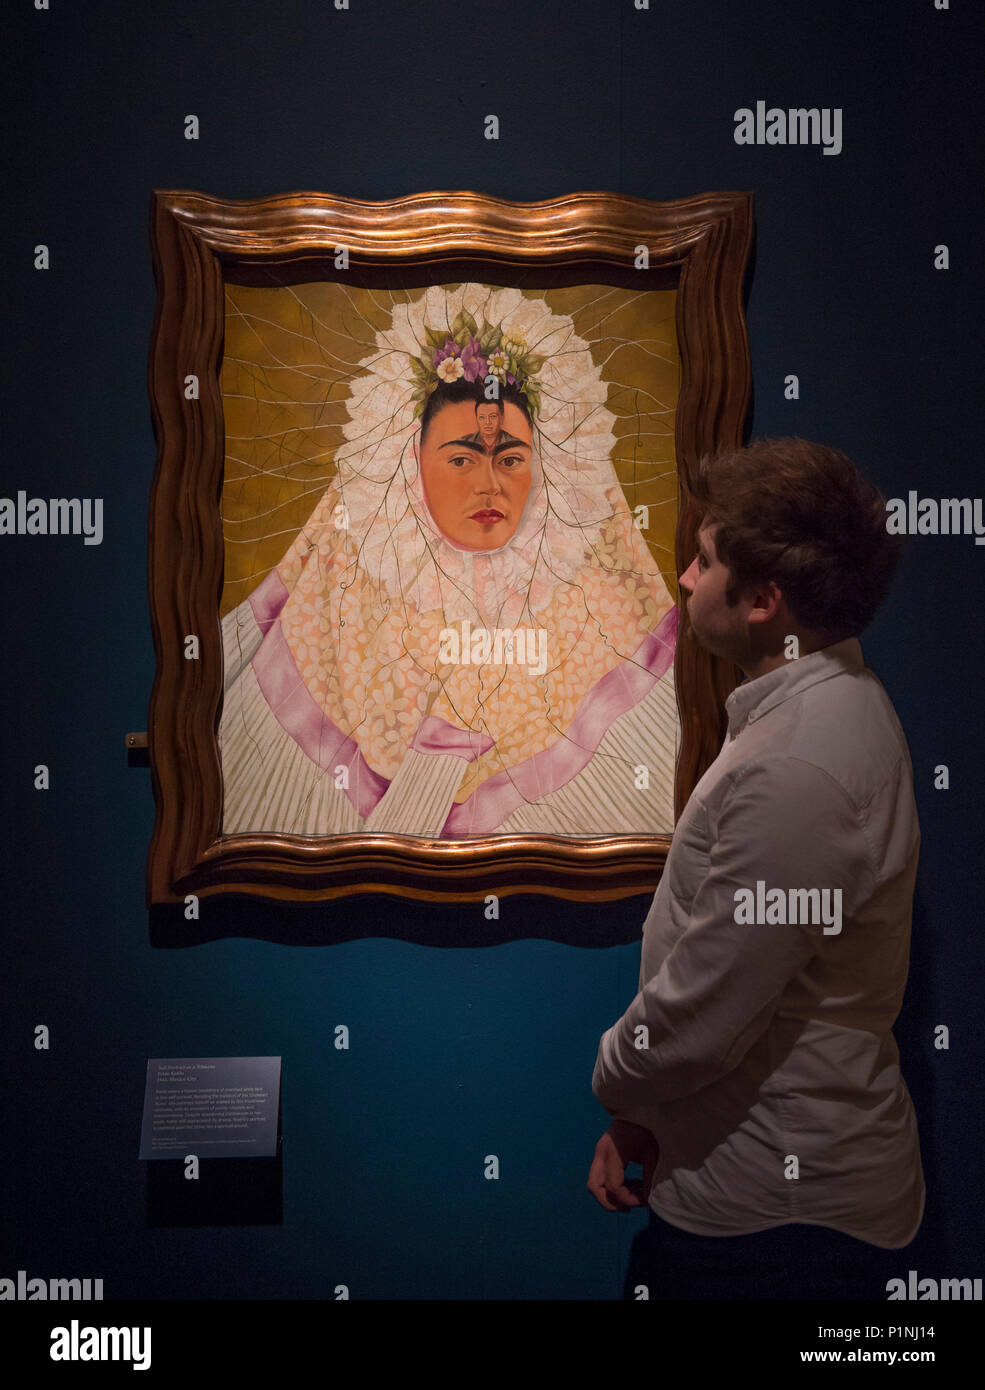 V&A, London, UK. 13 June 2018. Frida Kahlo’s possessions, including 22 outfits, paintings, jewellery and medical paraphernalia, have left Mexico for the first time to go on display at the V&A. The exhibition showcases more than 200 objects from the Blue House, some of which have never been on display before; presenting an unparalleled insight into Kahlo’s life. Photo: Self-portrait as a Tehuana, Frida Kahlo. 1943, Mexico City. The Jacques and Natasha Gelman Collection of 20th Century Mexican Art and The Vergel Collection. Posed with Museum staff. Credit: Malcolm Park editorial/Alamy Live News Stock Photo